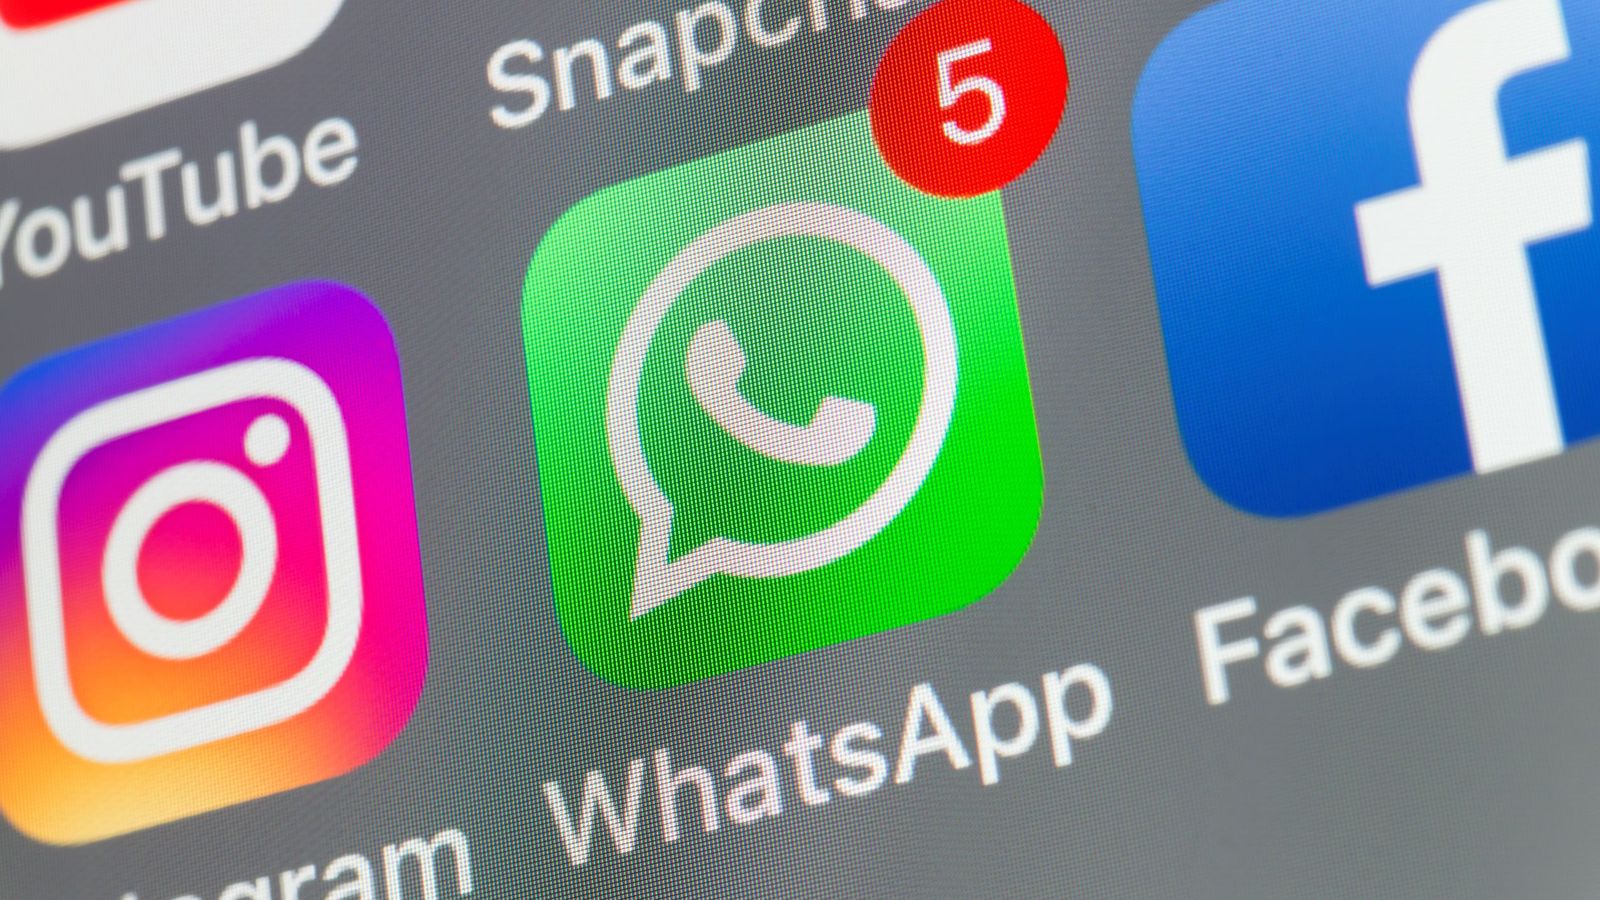 WhatsApp, Facebook and Instagram outages caused by 'faulty configuration change'. Science & Tech News